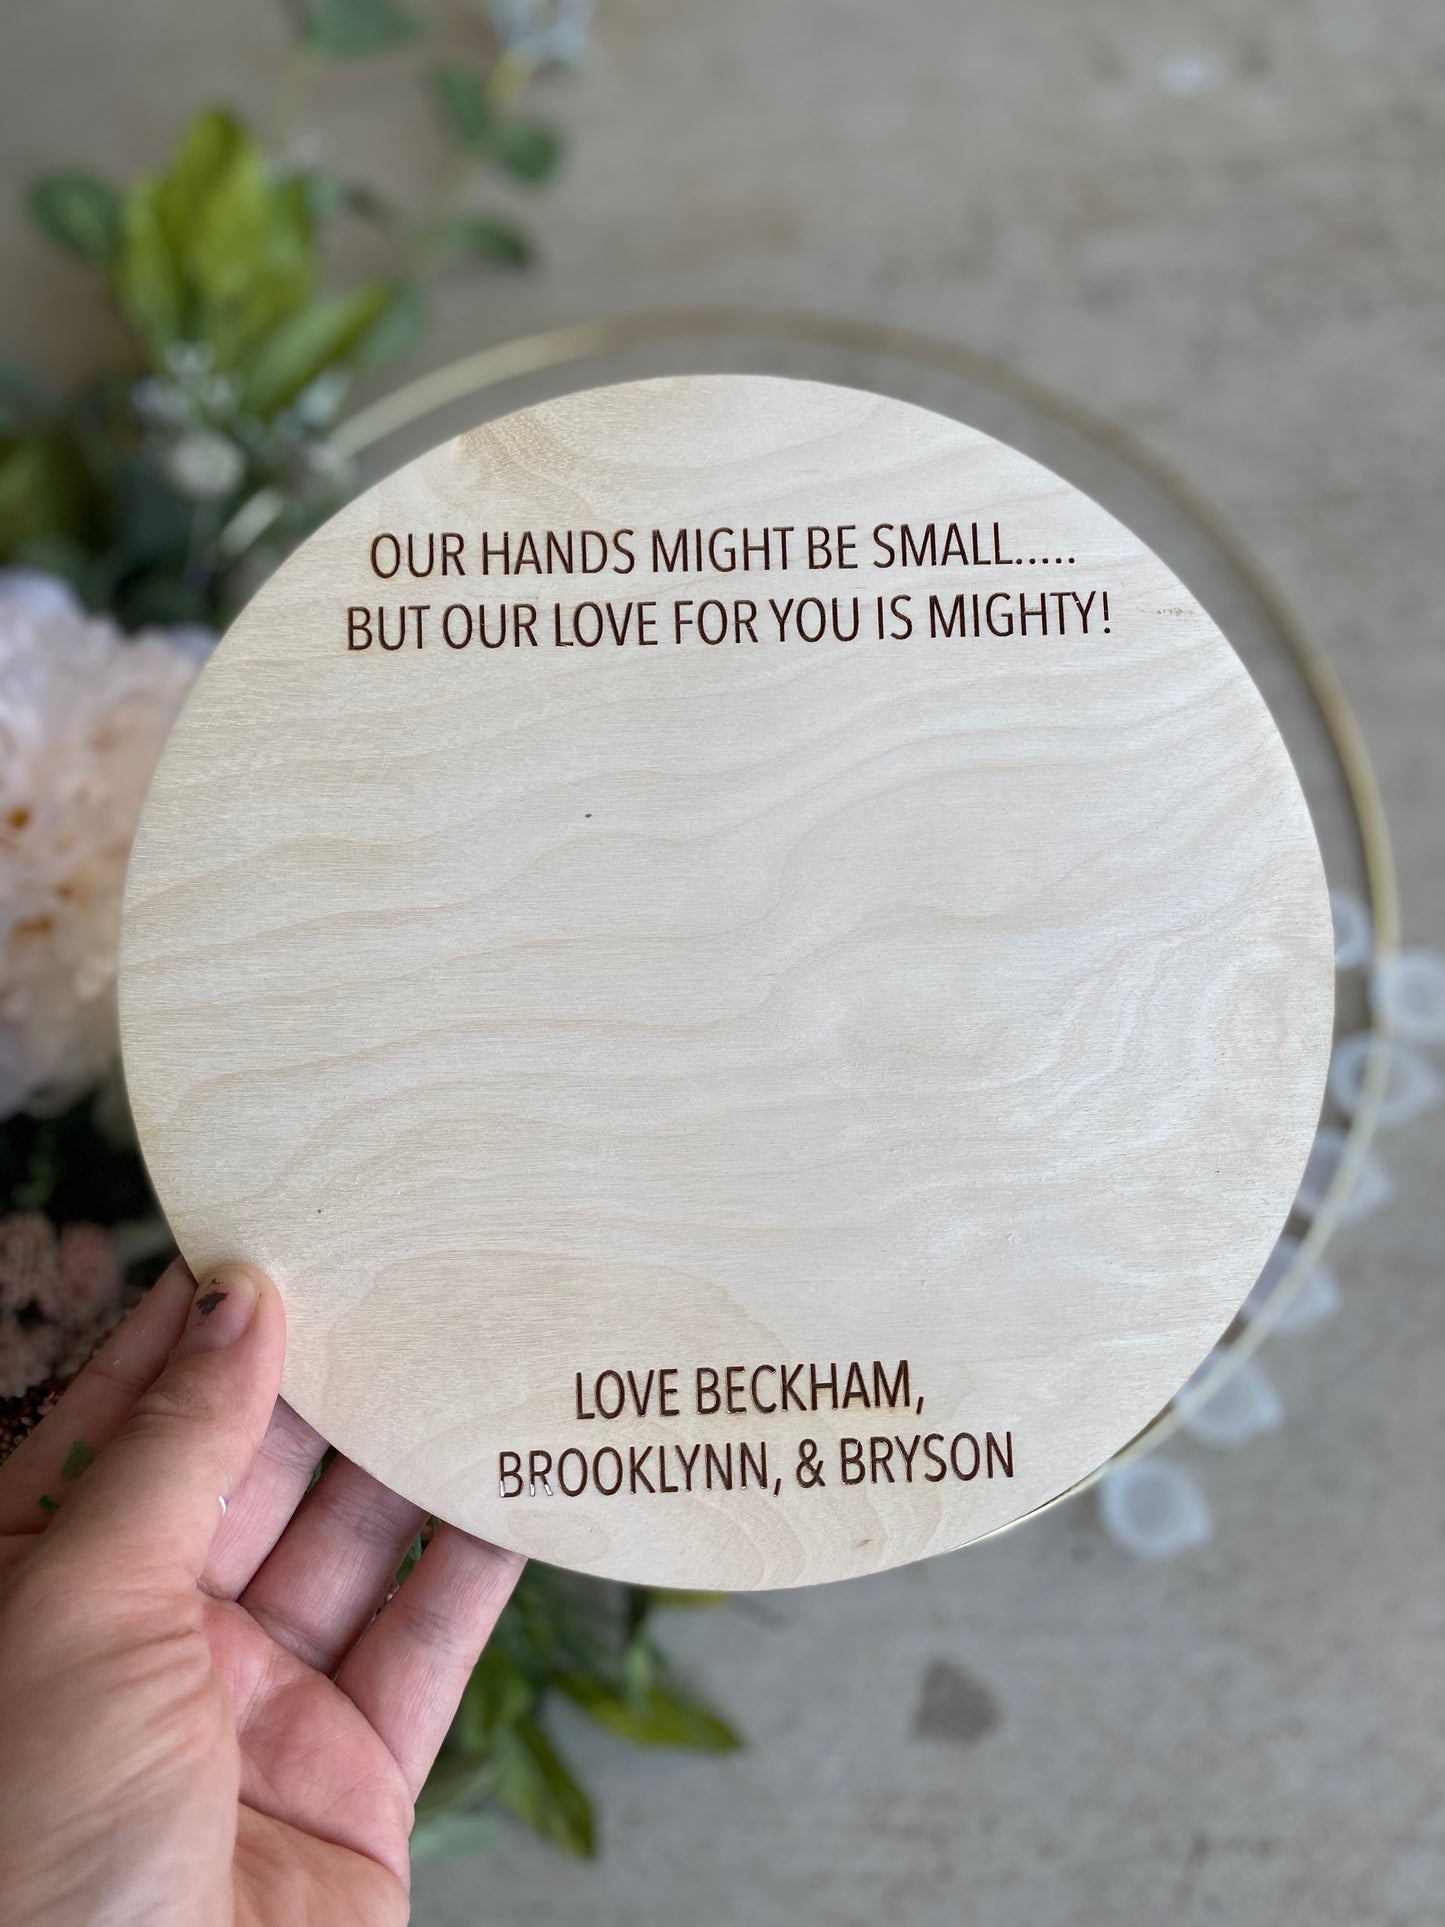 Mother’s Day - Small Hands, Might Love